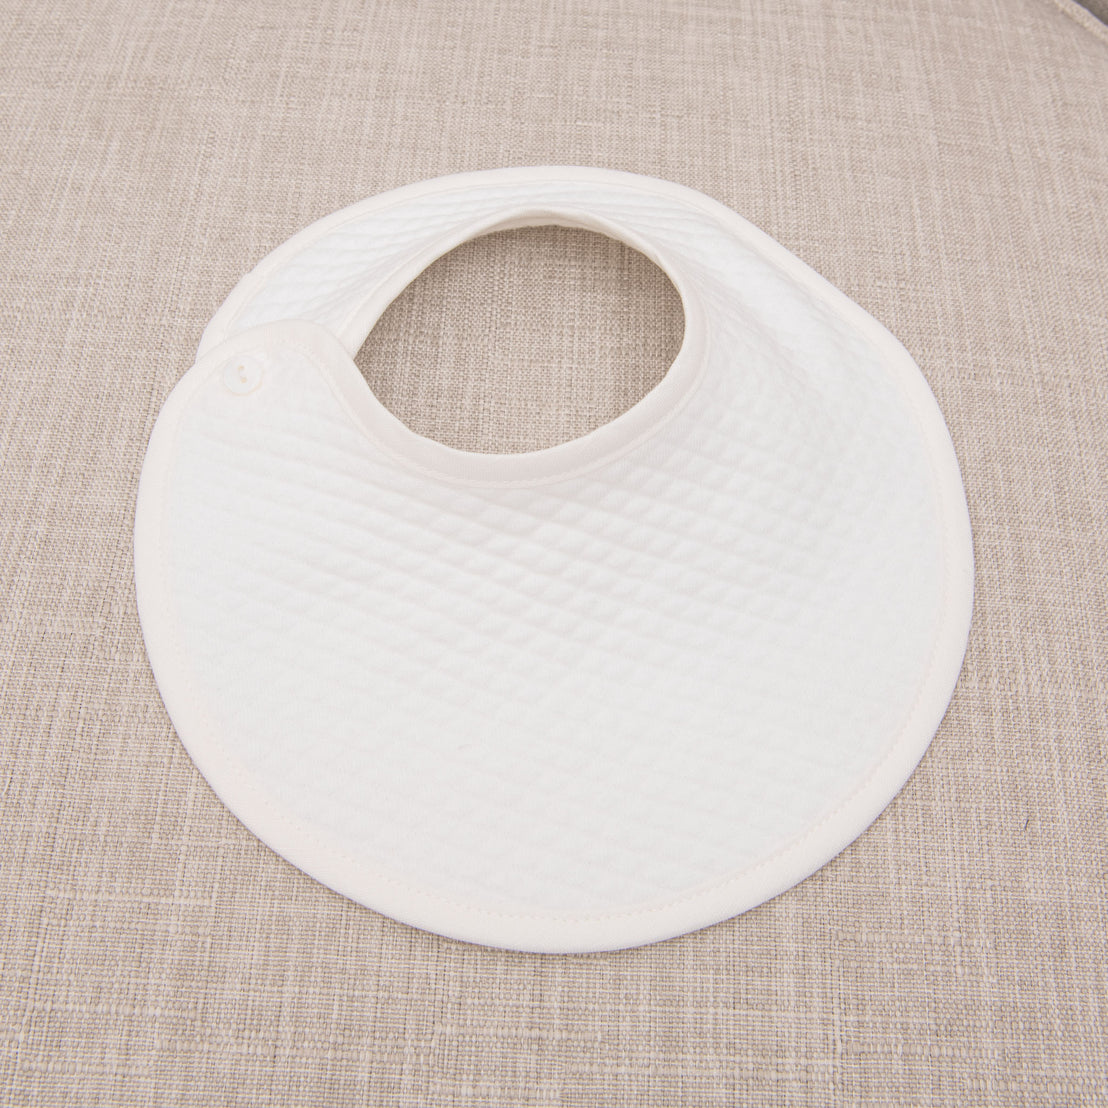 Close up detail of the quilted white cotton on the Rowan baptism bib.